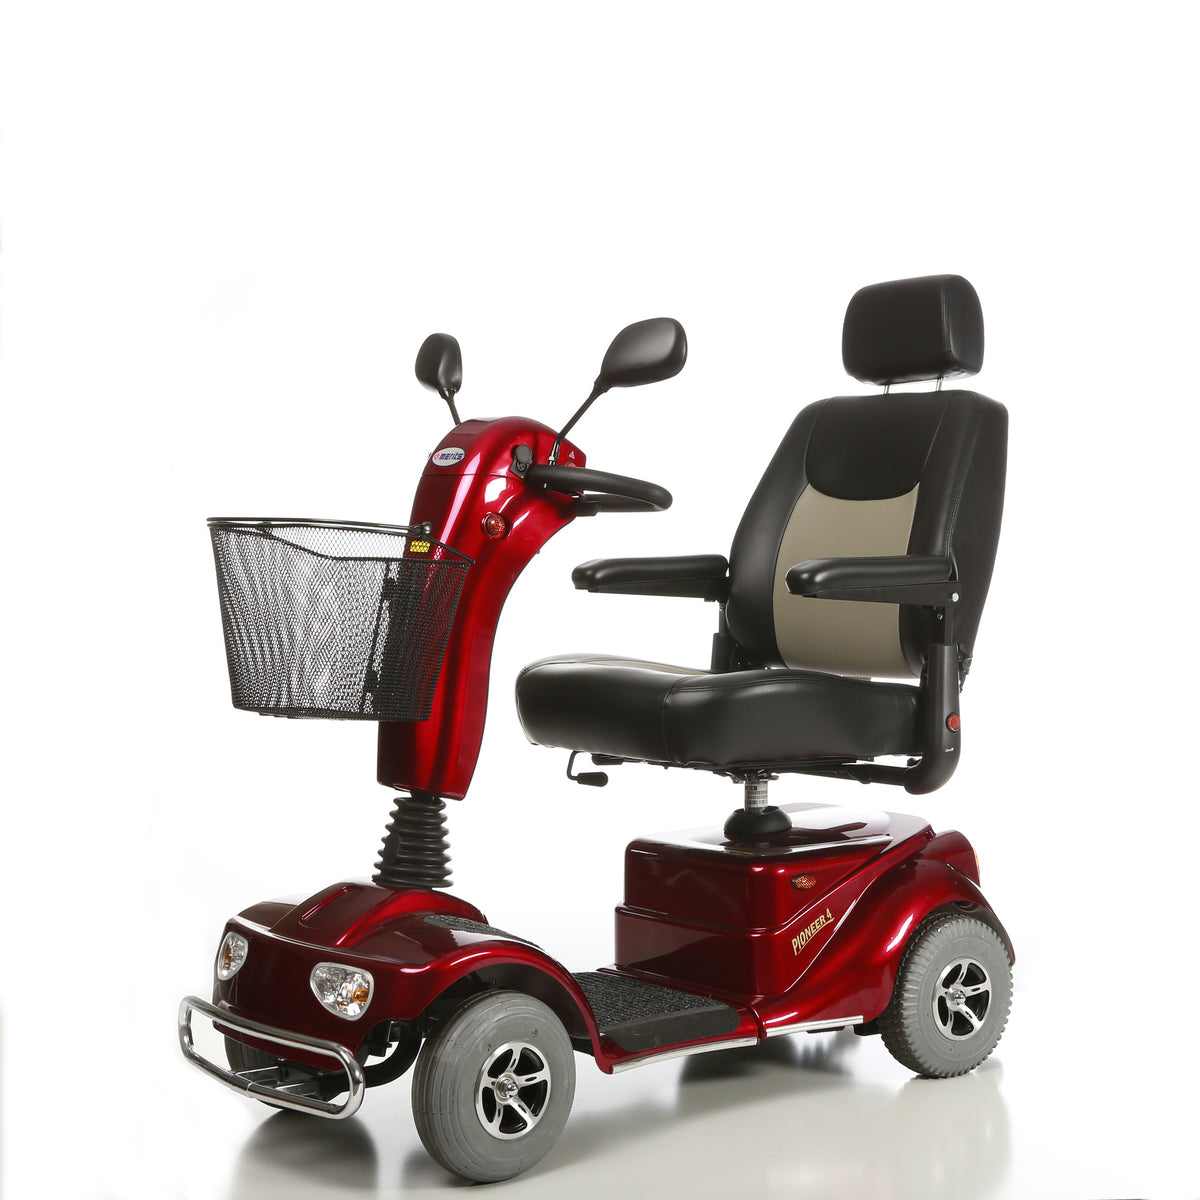 PIONEER 4 ELECTRIC MOBILITY SCOOTER 4-WHEEL (S141)